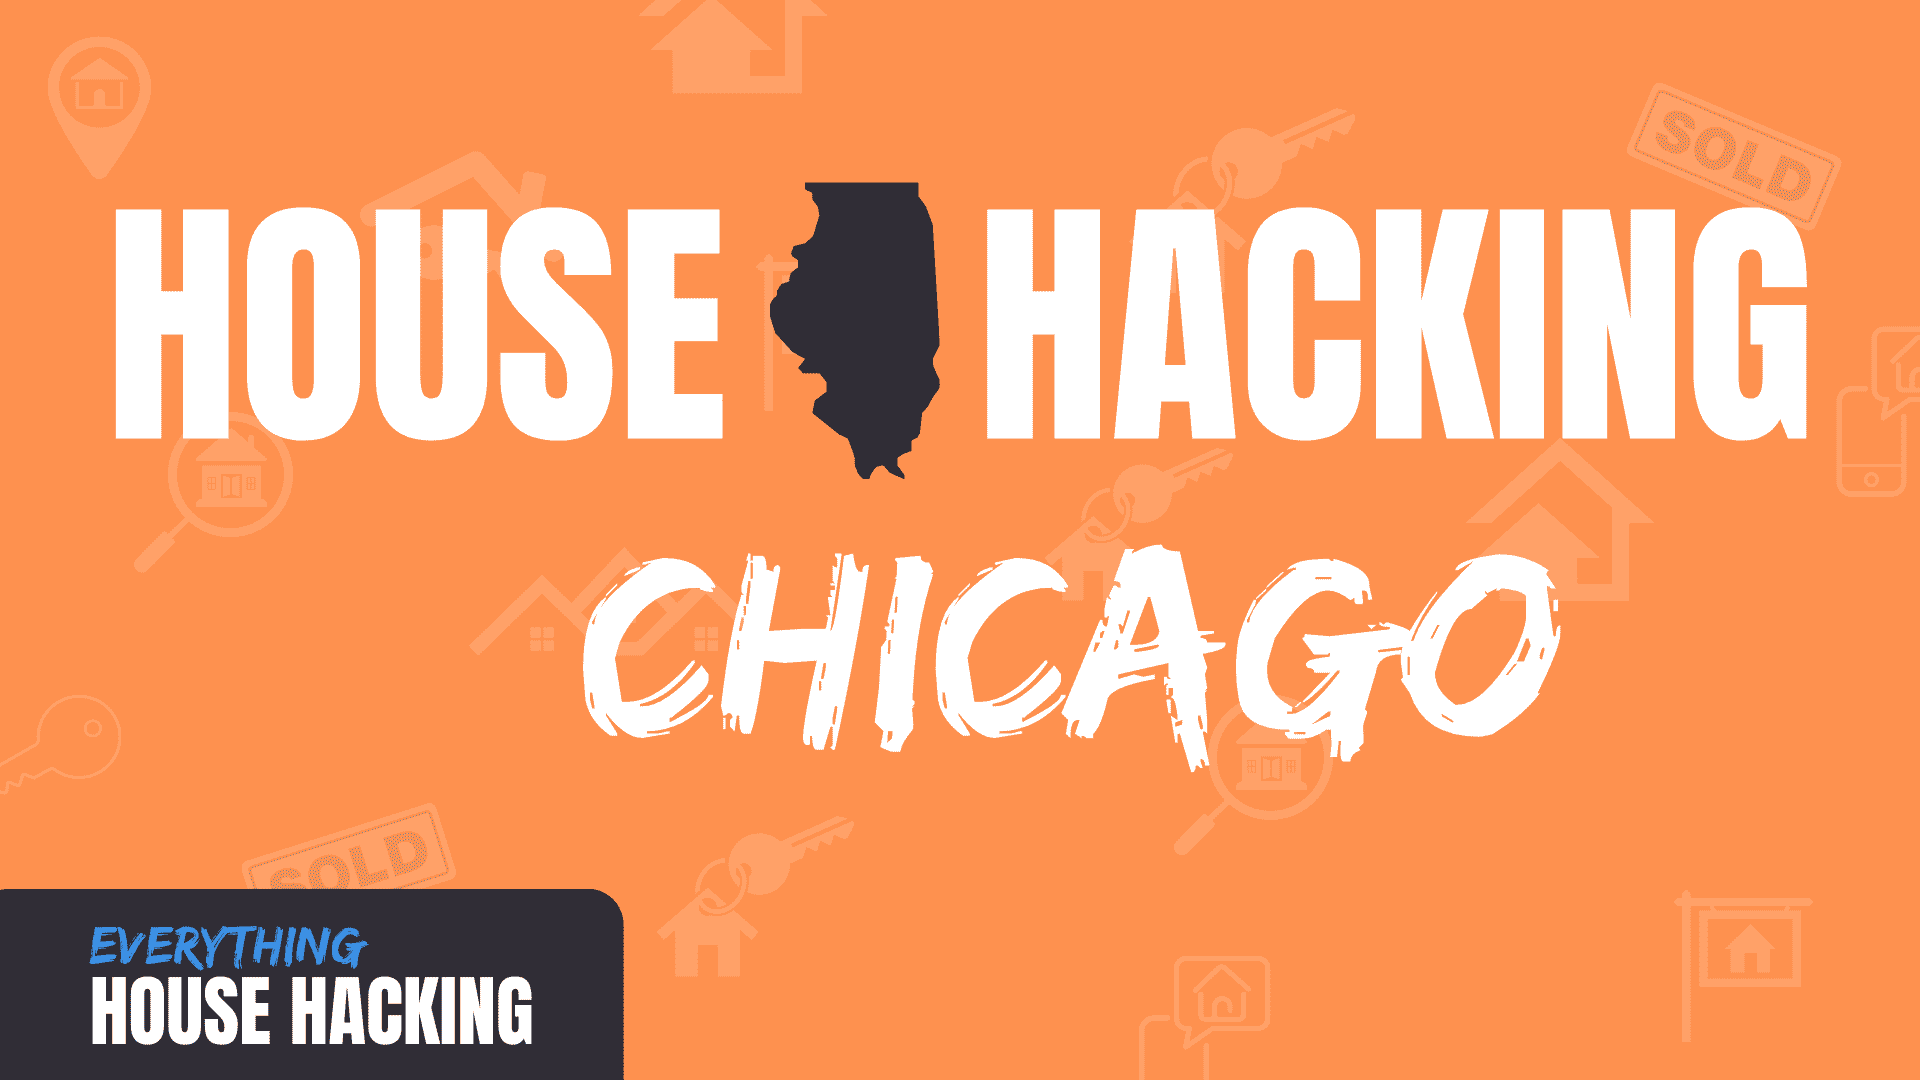 house hacking chicago in white text on orange background with clipart of illinois state in gray